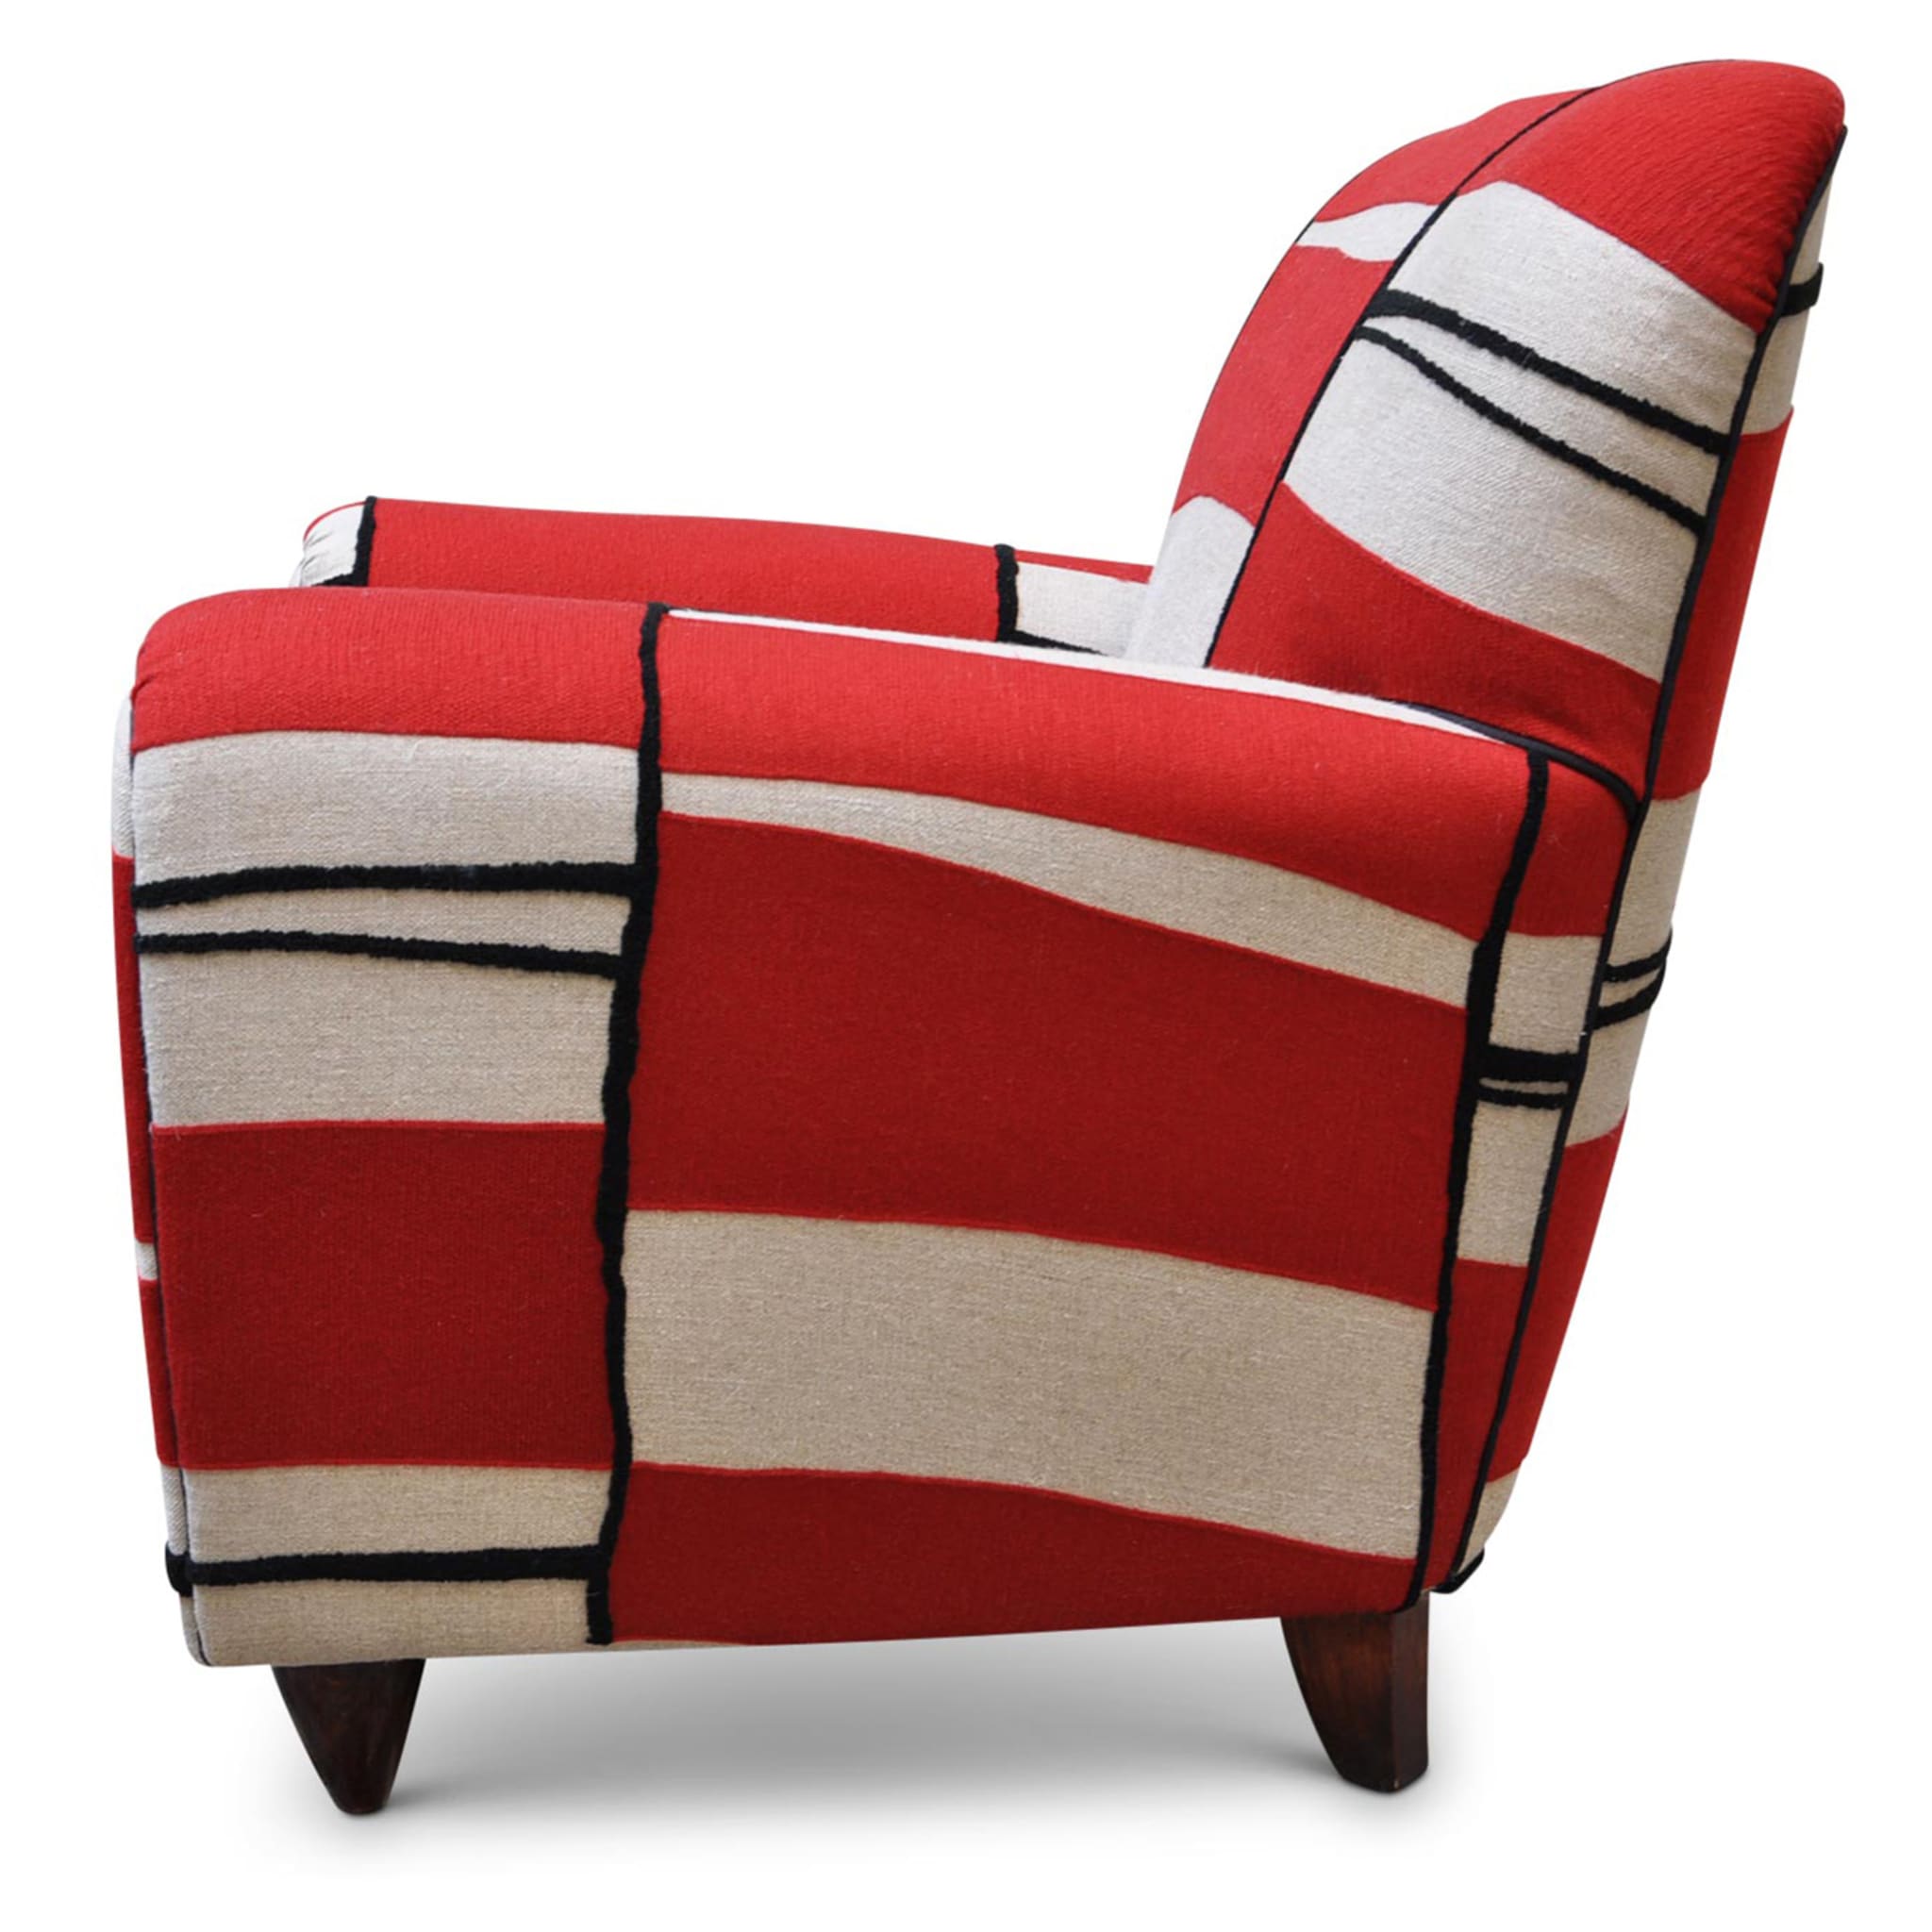 Red & White Passion Armchair - Alternative view 2